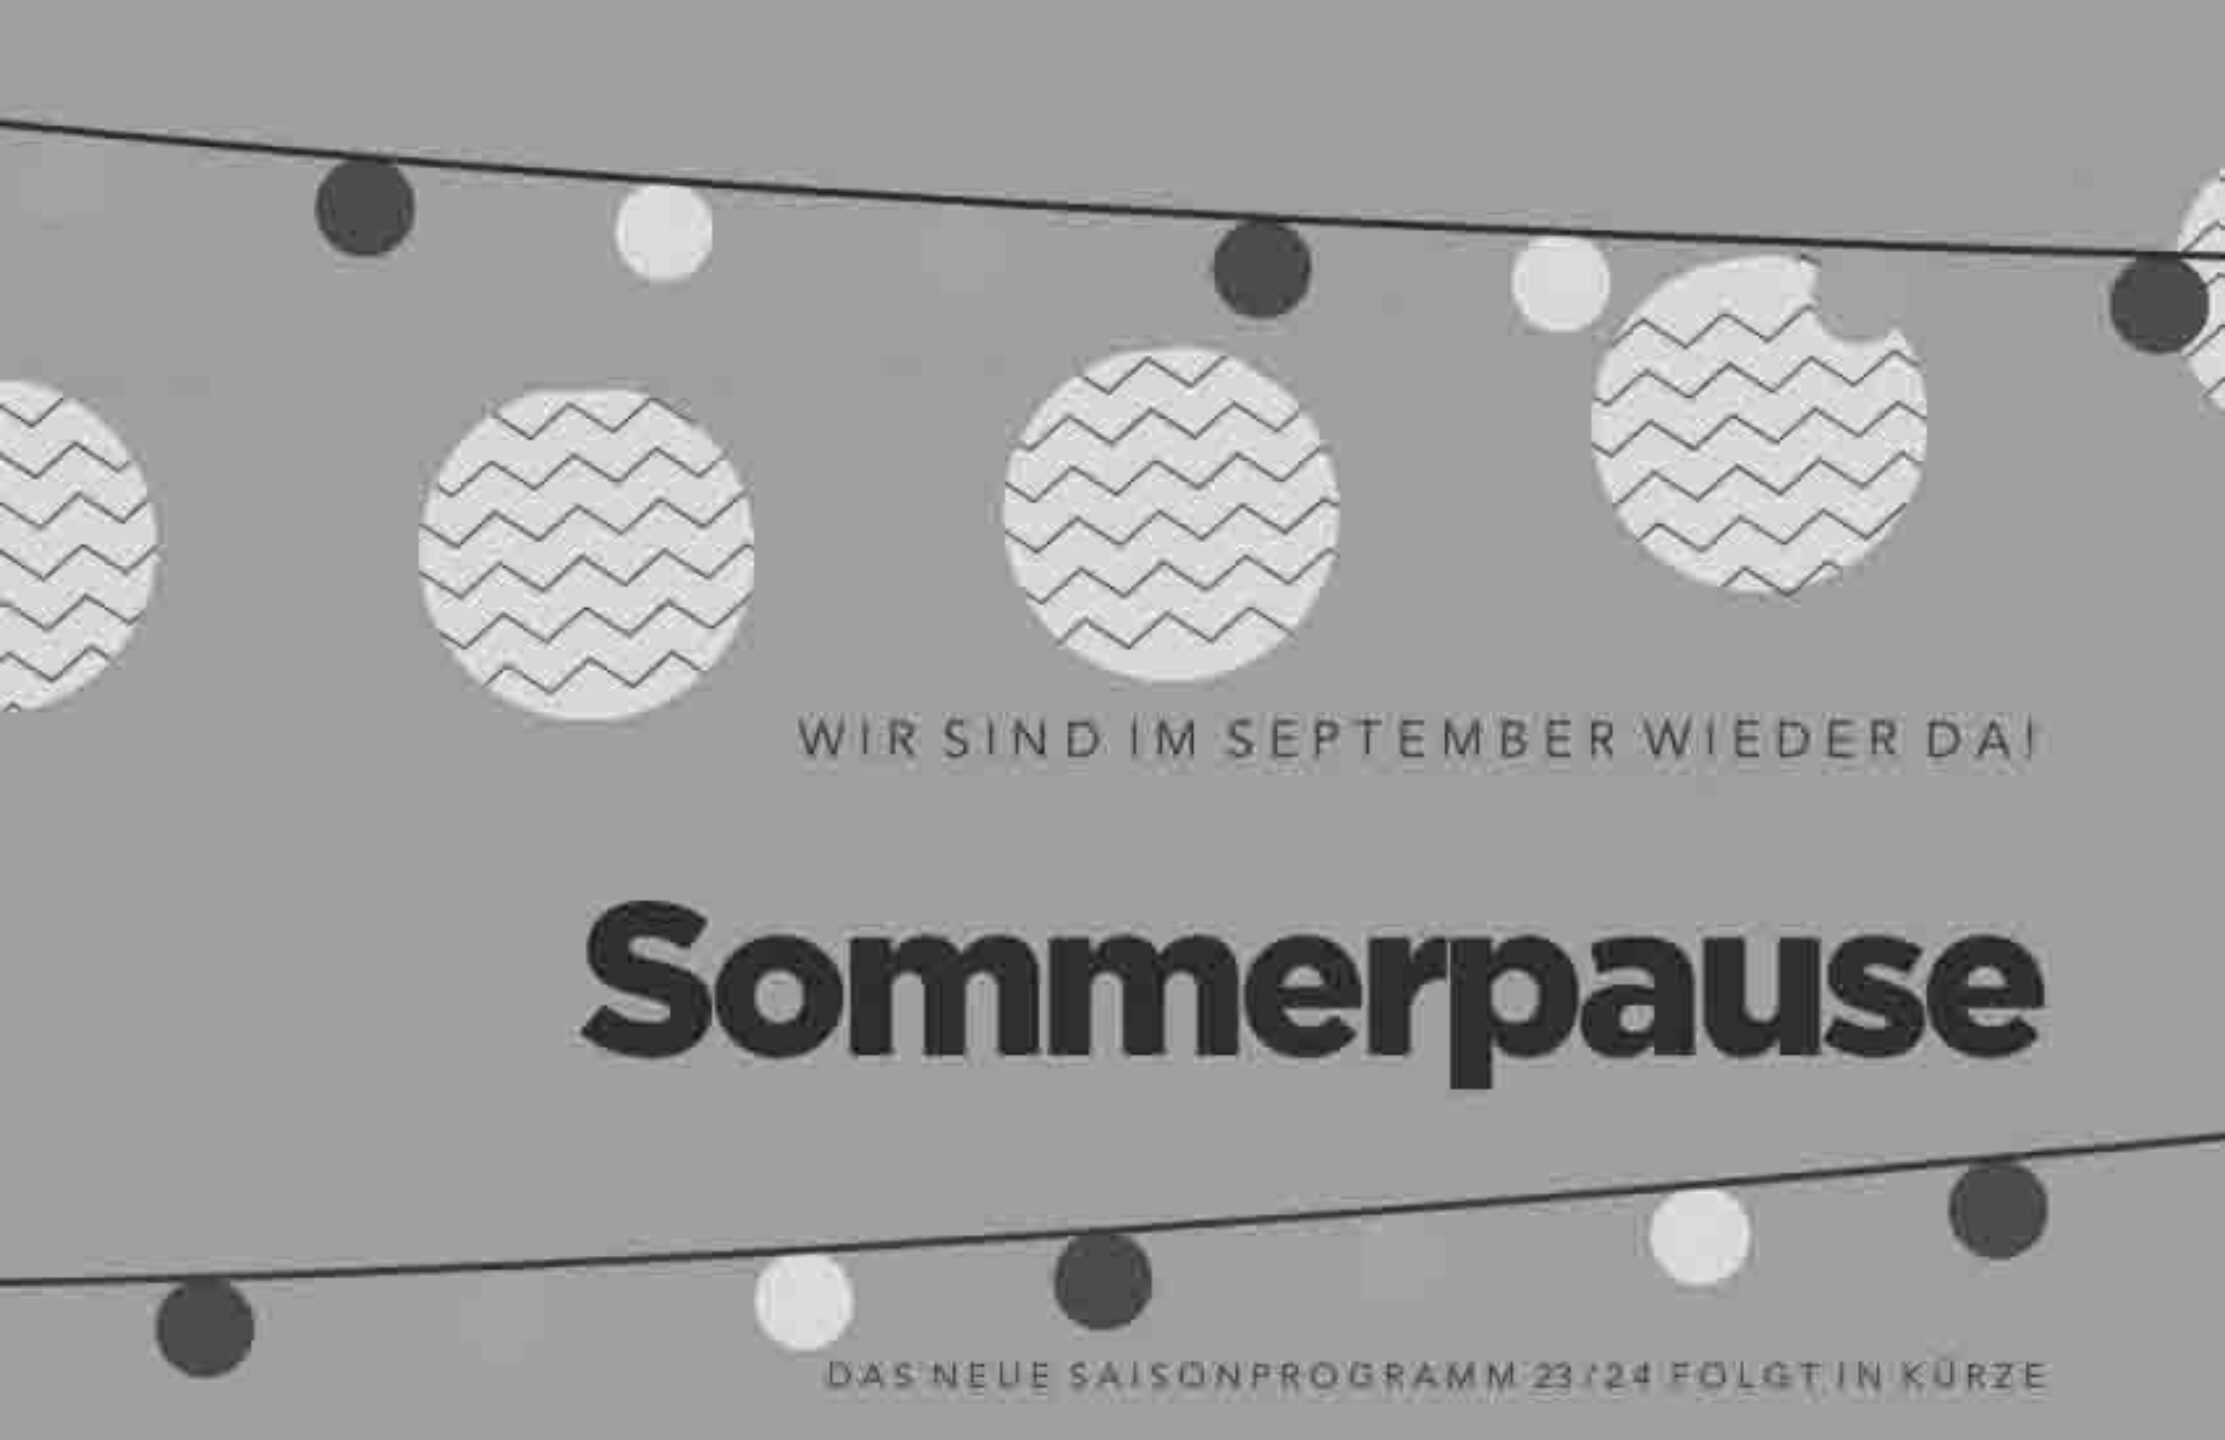 Thumbnail Sommerpause TADL2023sw